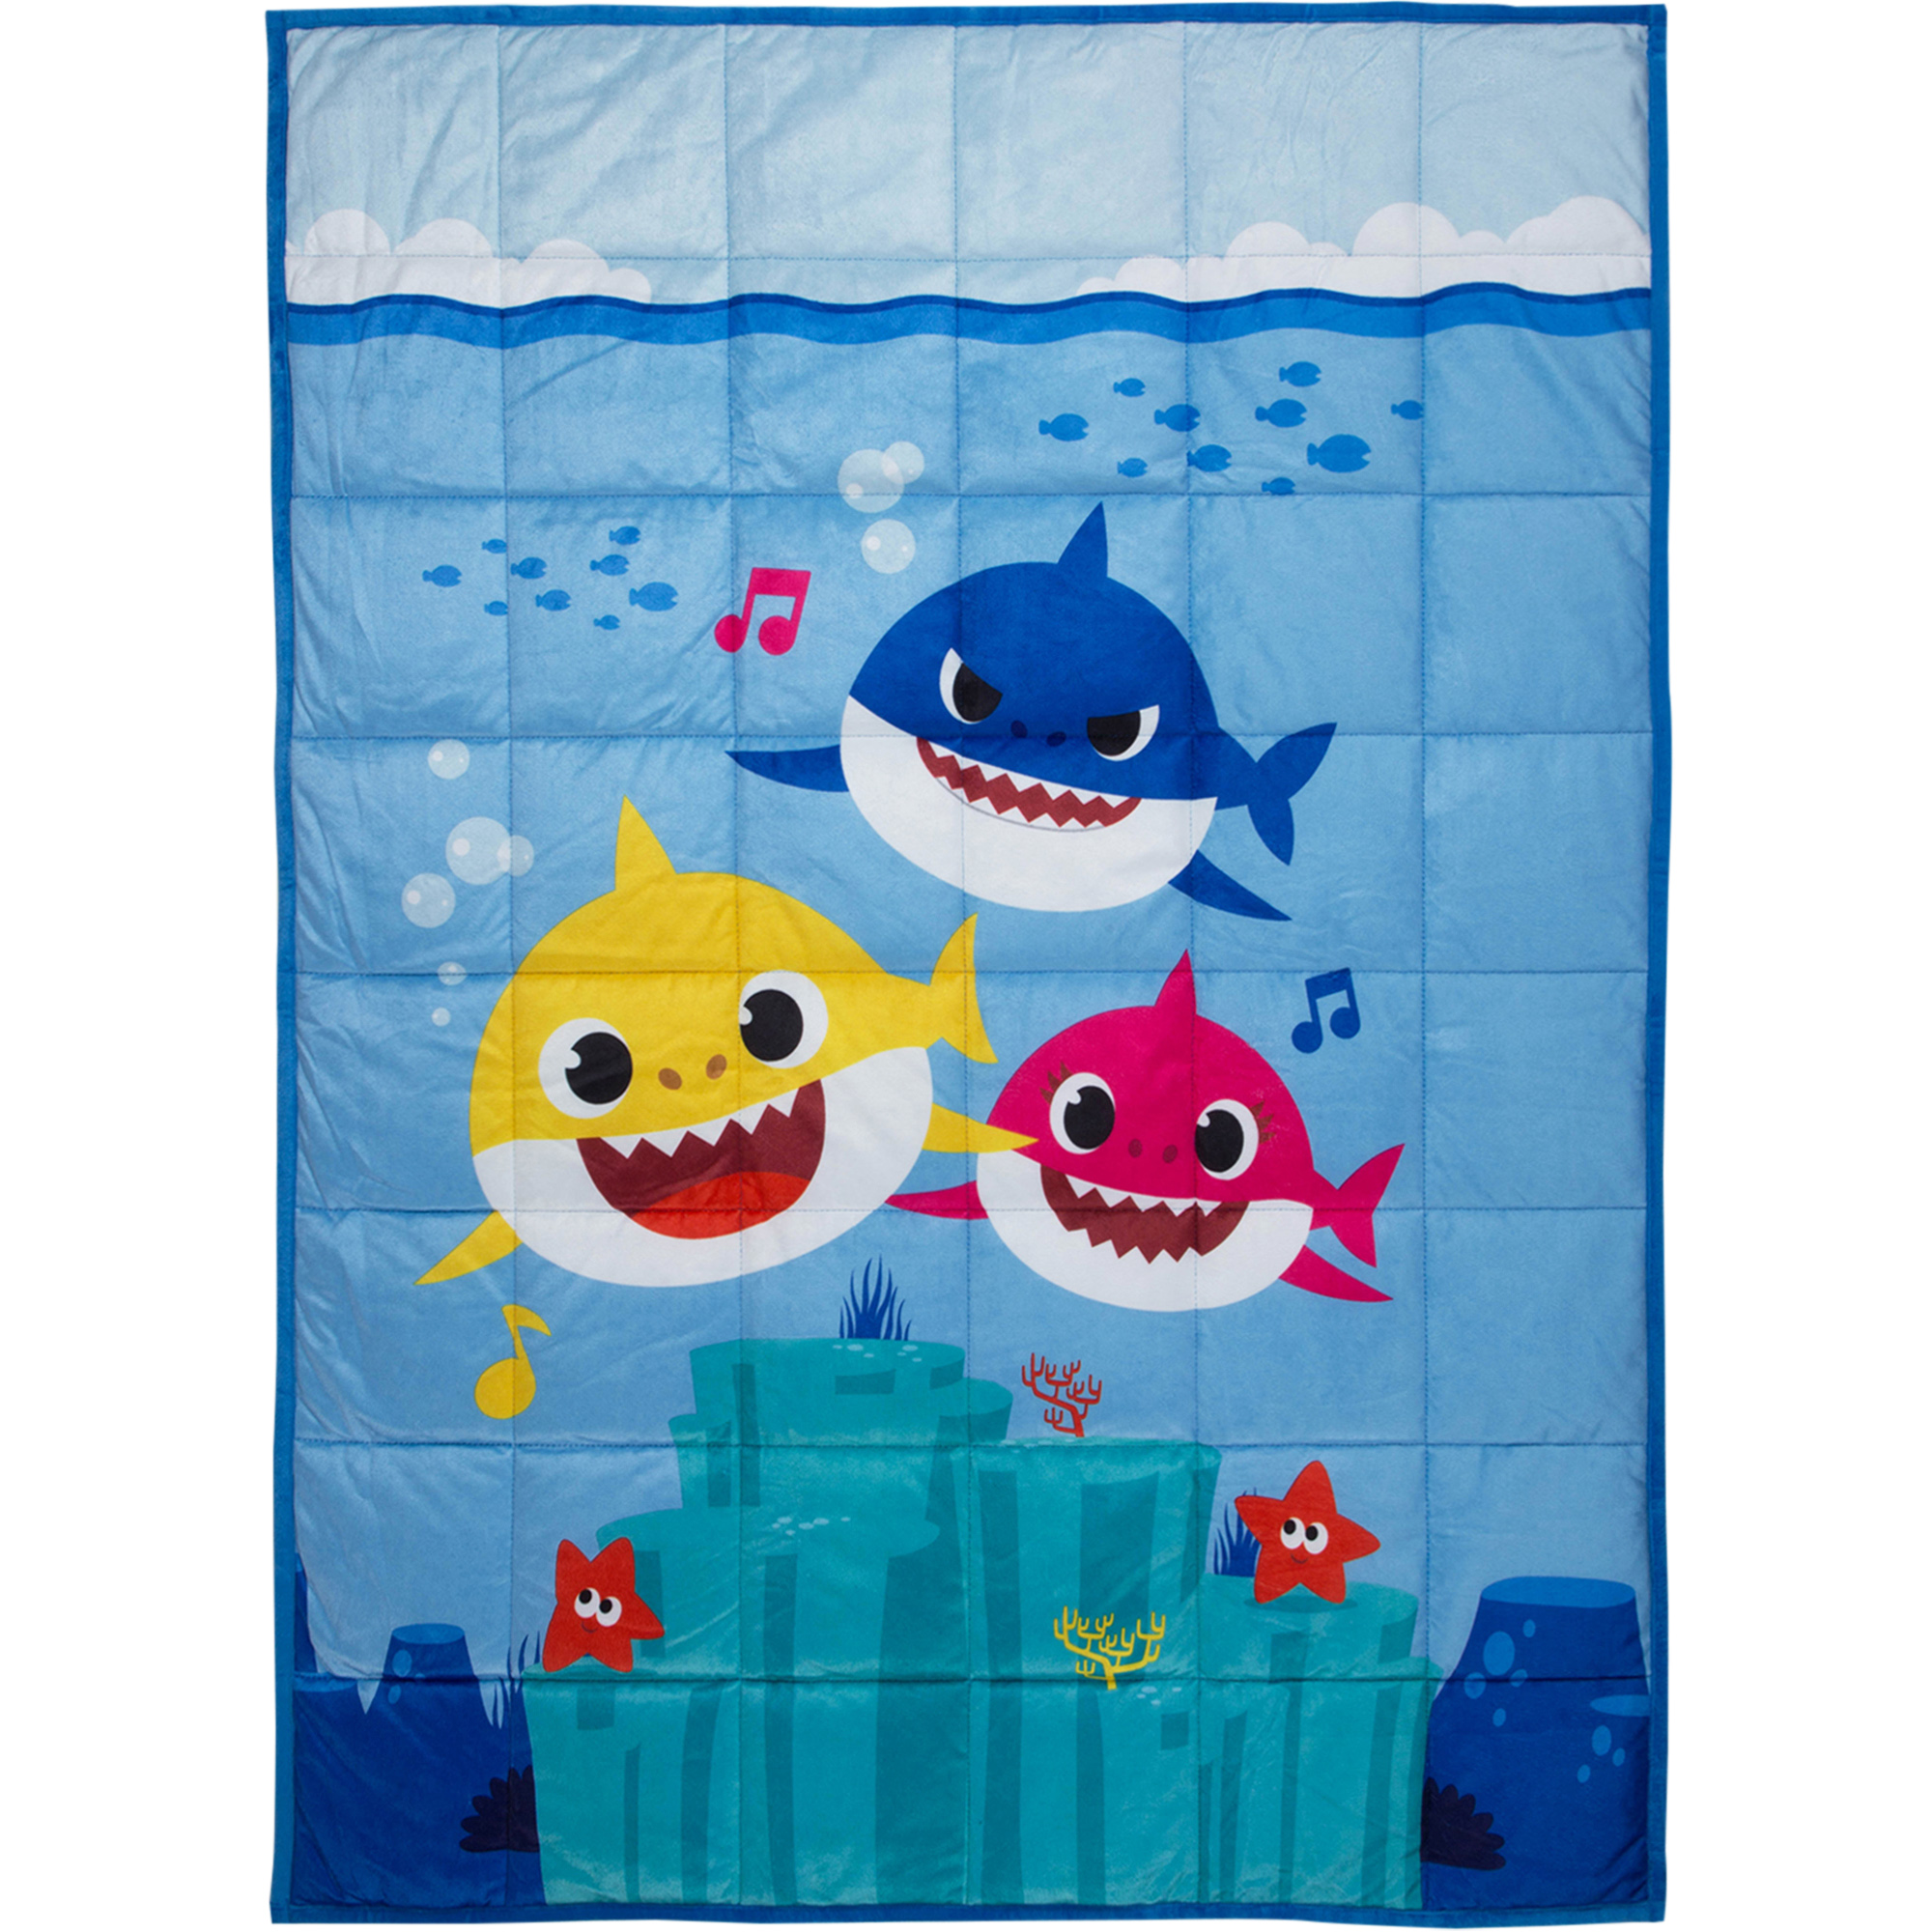 Baby Shark Kids Weighted Blanket, Super Soft Plush Bedding, 36" x 48" 4.5lbs, Blue - image 2 of 11